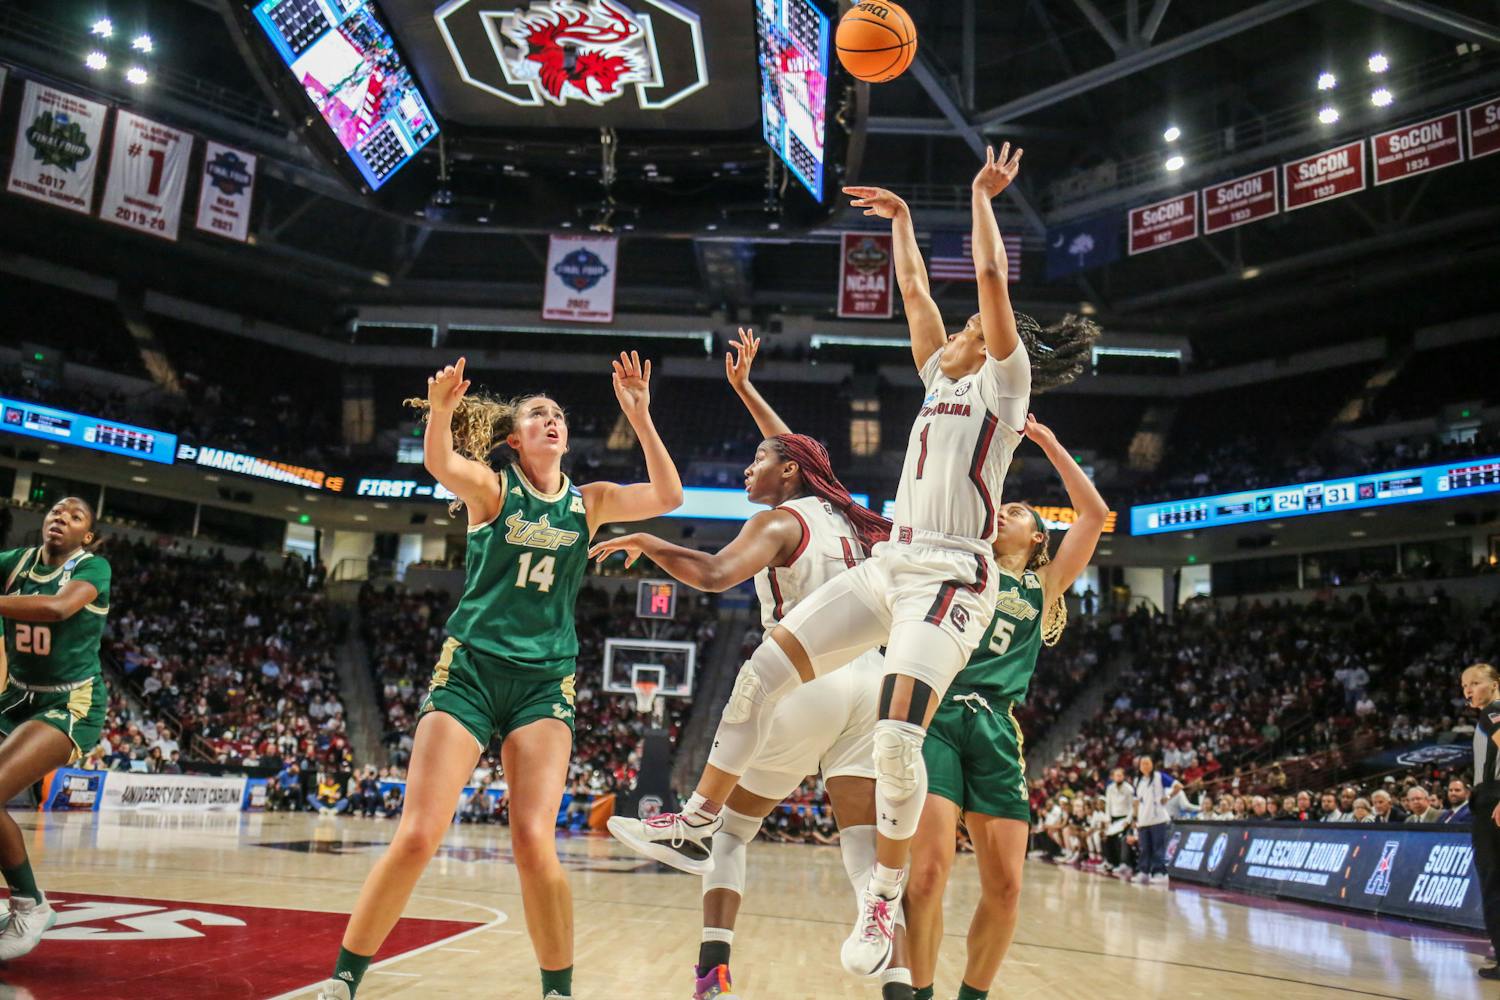 The Gamecock women's basketball team defeated the South Florida Bulls 76-45 in the second round of the NCAA Women's Basketball Tournament at Colonial Life Arena on March 19, 2023. The Gamecocks advanced to the Sweet 16 set to take place from March 24 to 25 in Greenville, S.C.&nbsp;